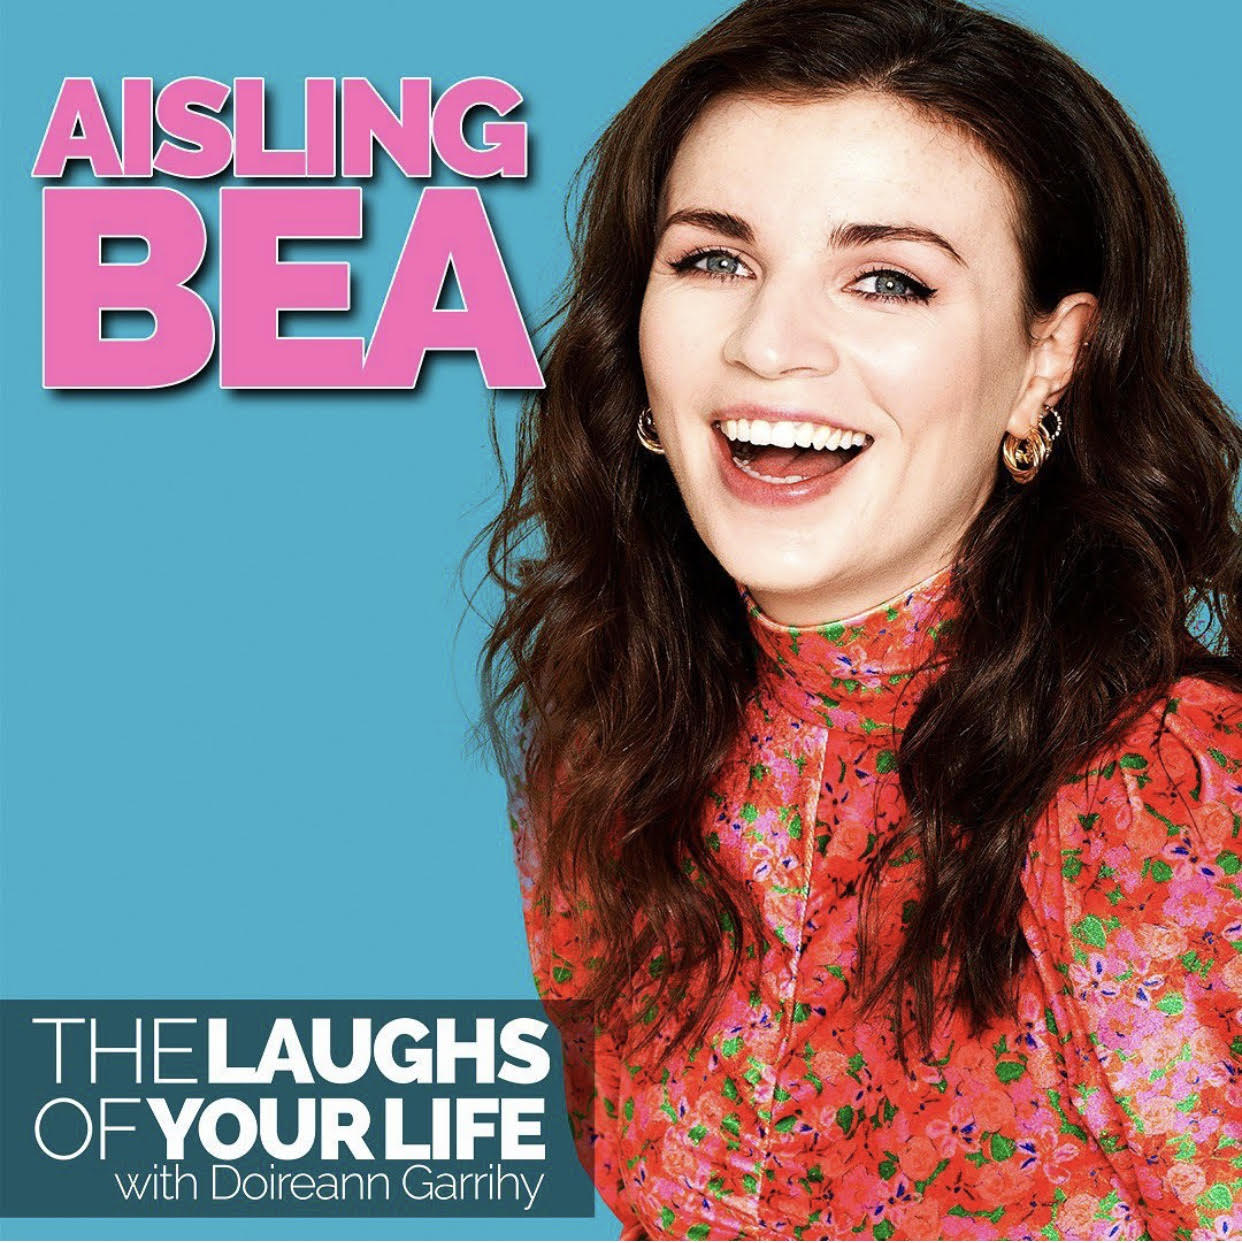 The Laughs of Your Life with Doireann Garrihy